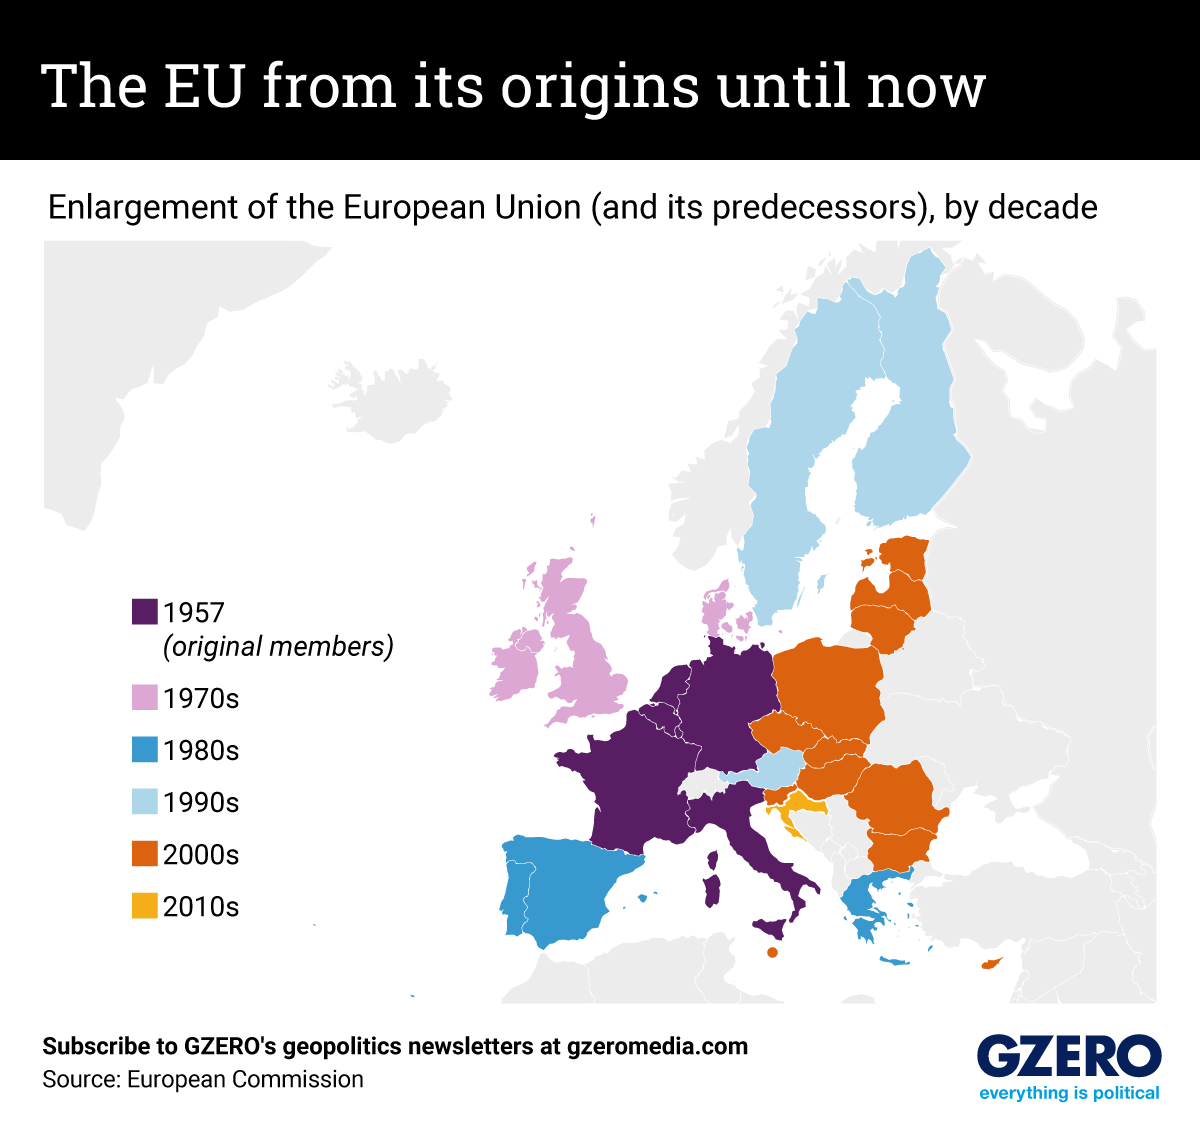 The Graphic Truth: The EU from its origins until now